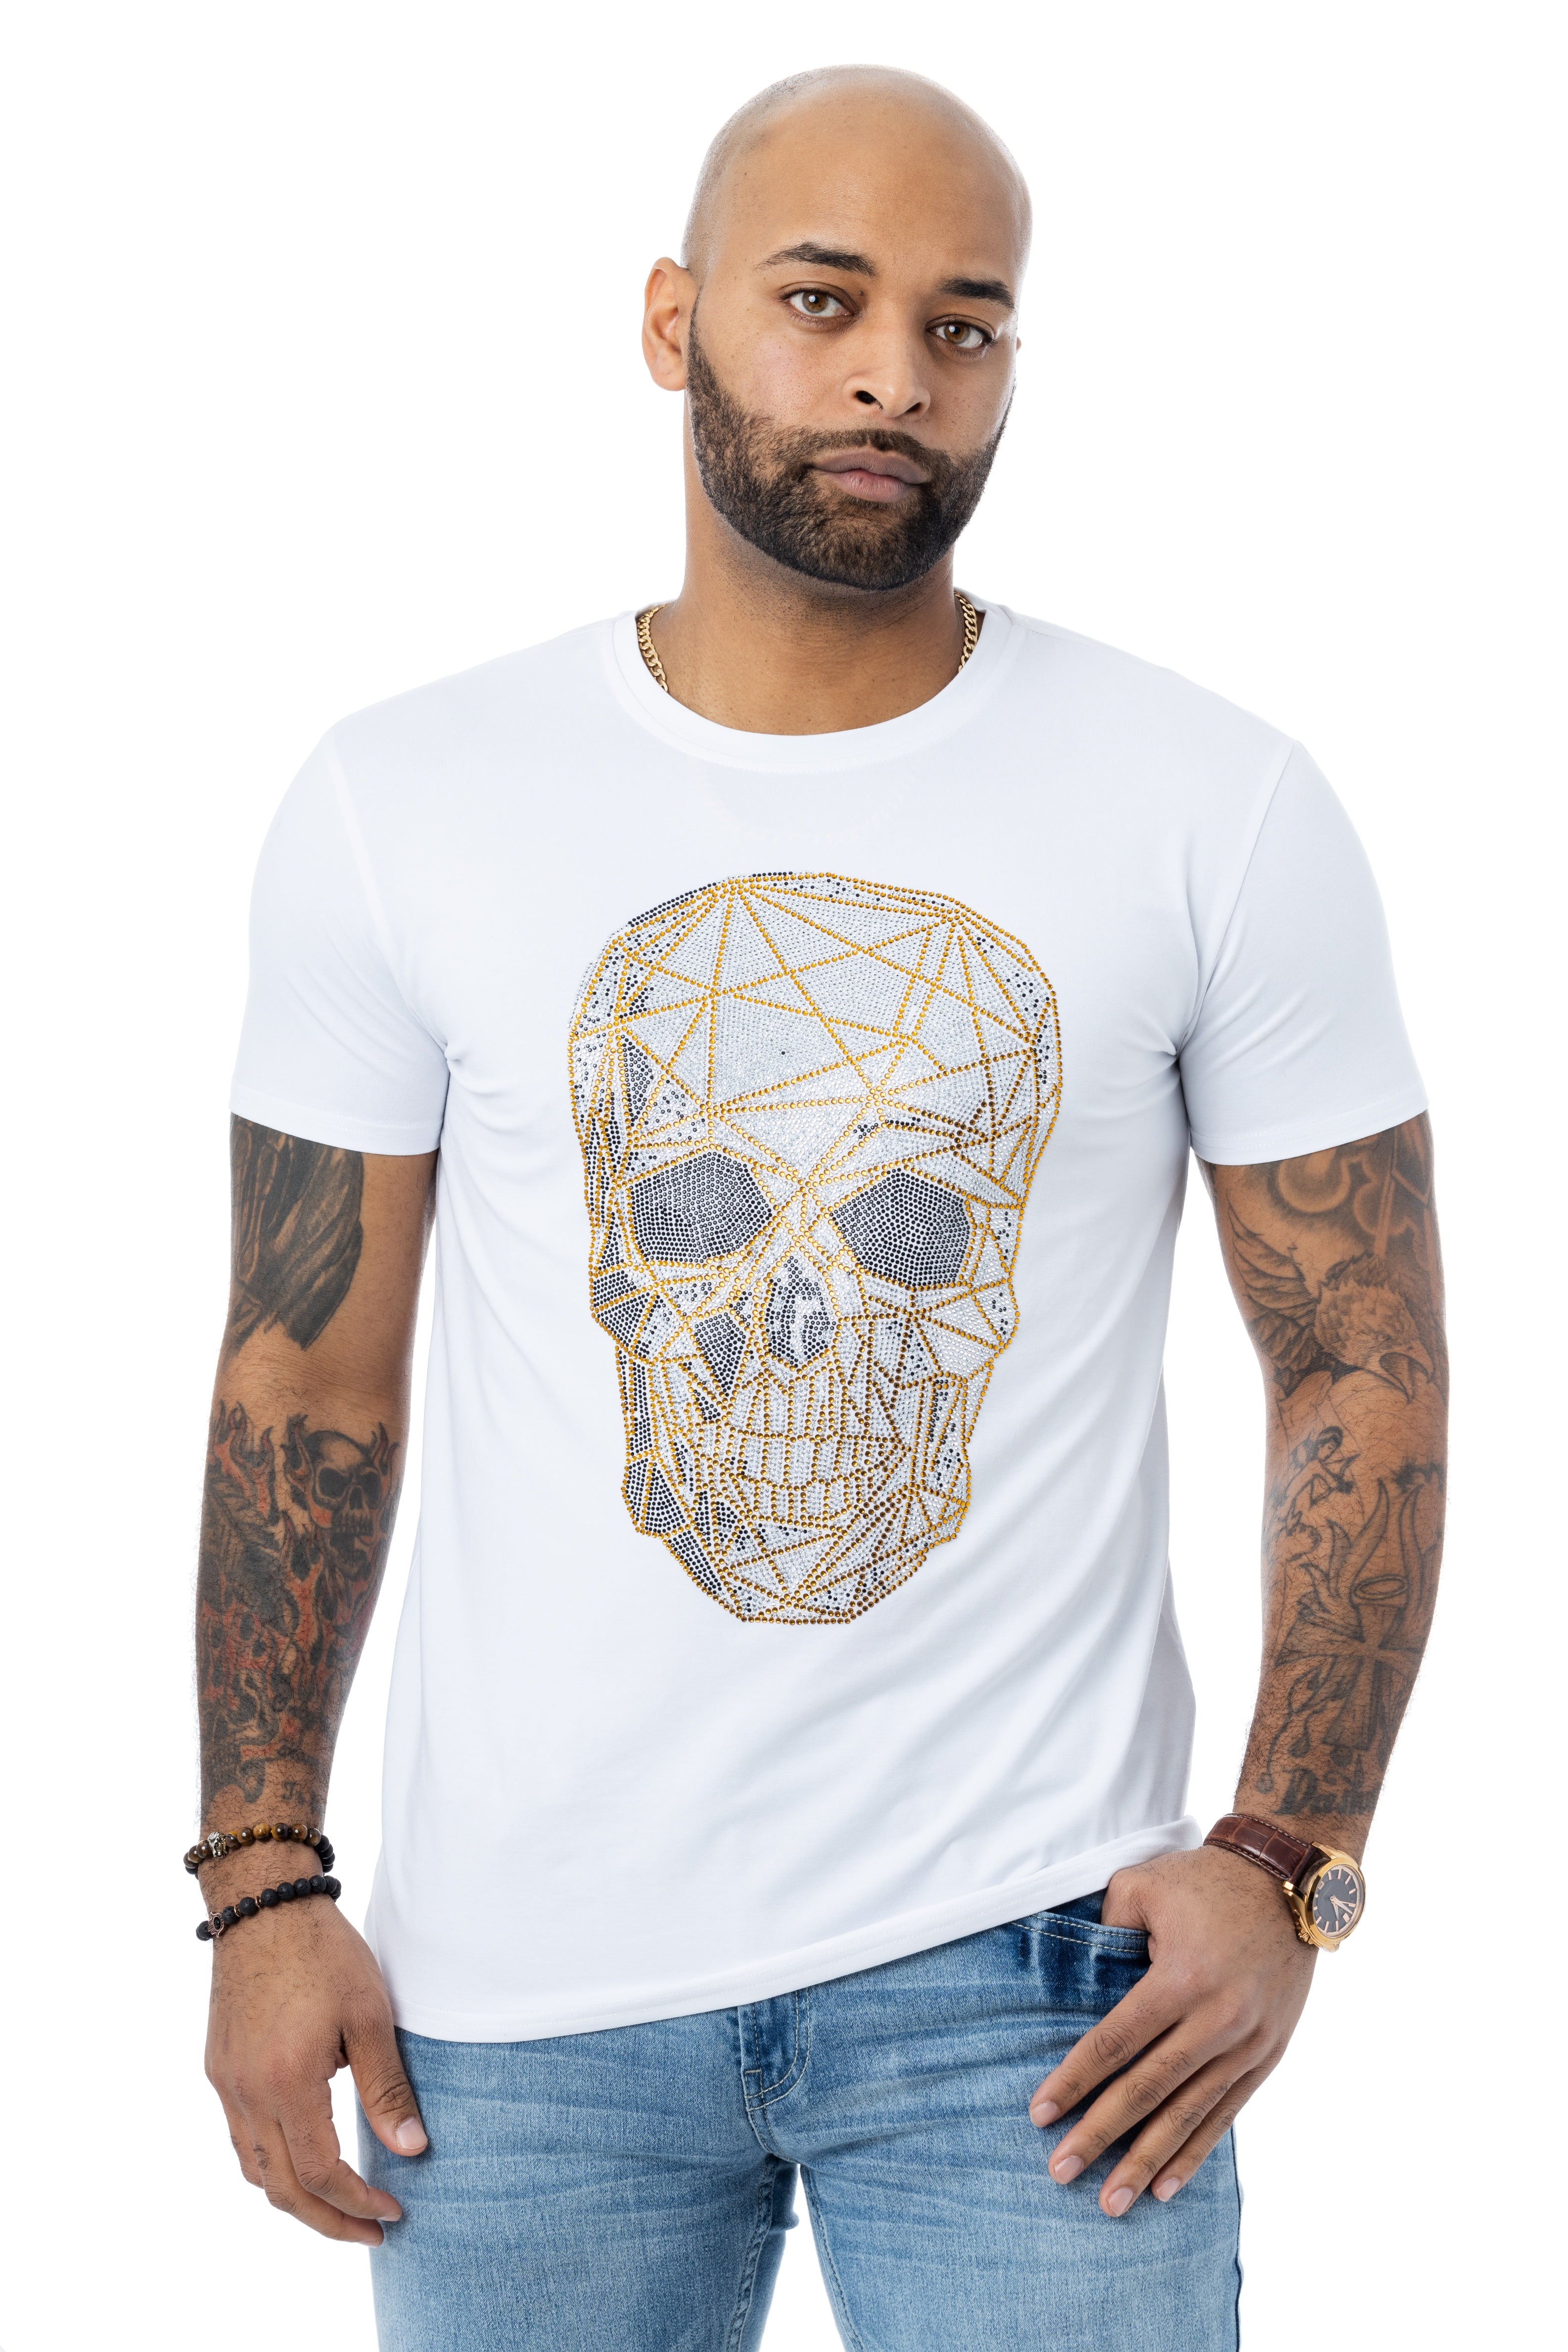 dommer Rejsende købmand ophavsret XRay Jeans Heads Or Tails Men's 3D Polygon Lined Skull Rhinestone Graphic T- Shirt – X-RAY JEANS